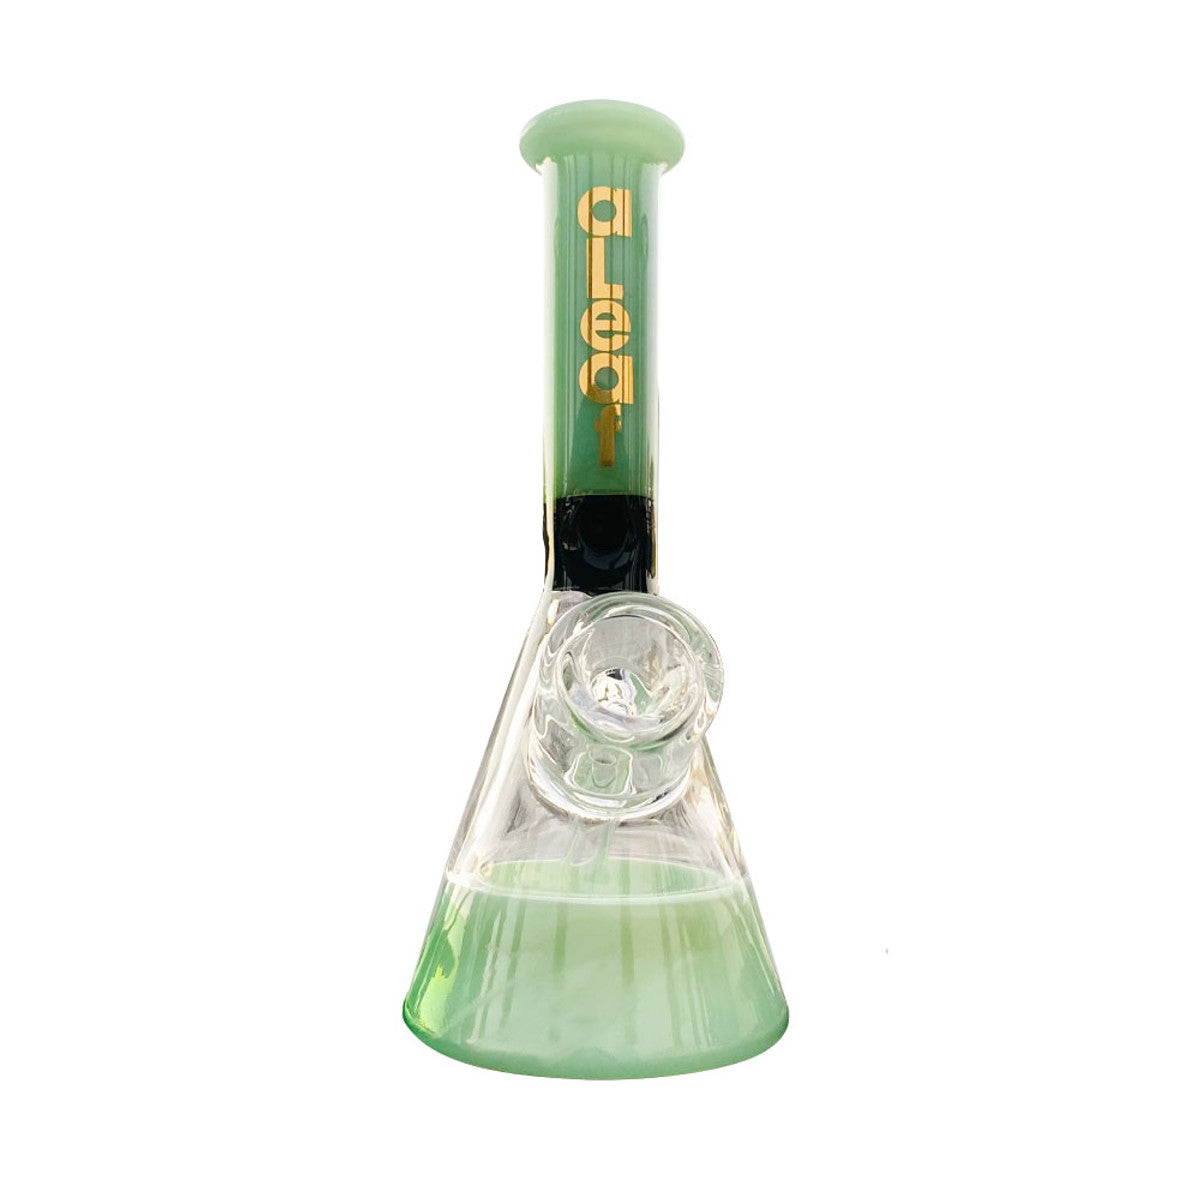 How cute are these mini beakers?! They are designed with a built-in bowl and heavy duty glass. Limited quantities available - get yours today!  ALeaf Glass makes quality and reliable glass products. aLeaf glass products produce amazing smoke and are extremely sturdy. Smoke from aLeaf Glass and you will instantly feel the difference!